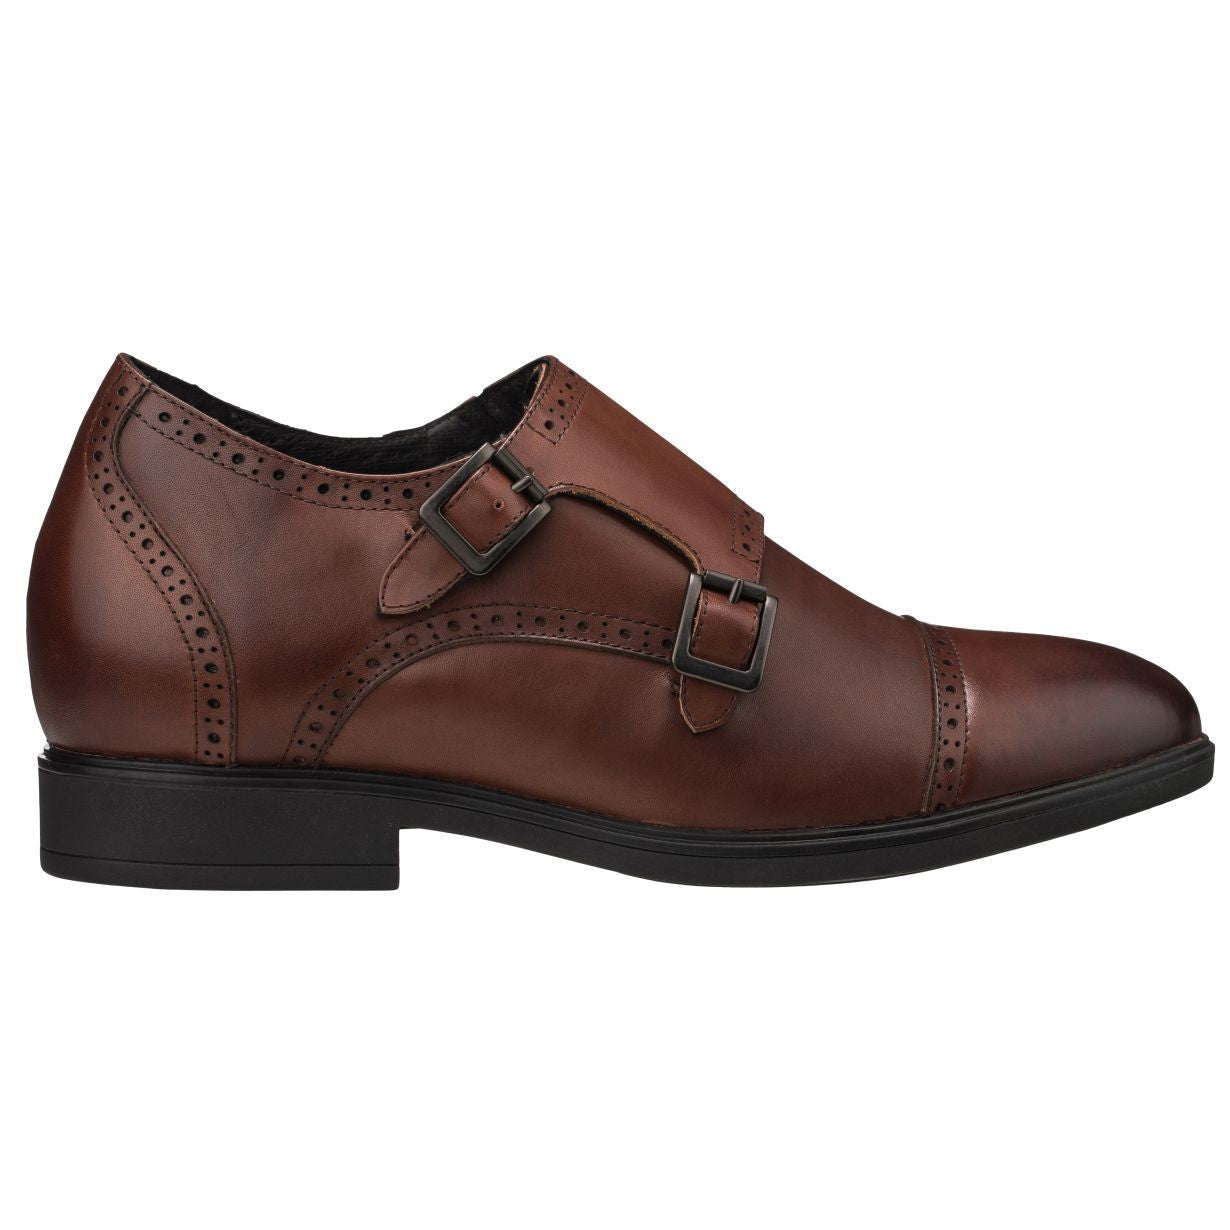 CALTO Dark Brown Leather Dress Shoes - 2.8 Inches - G65772